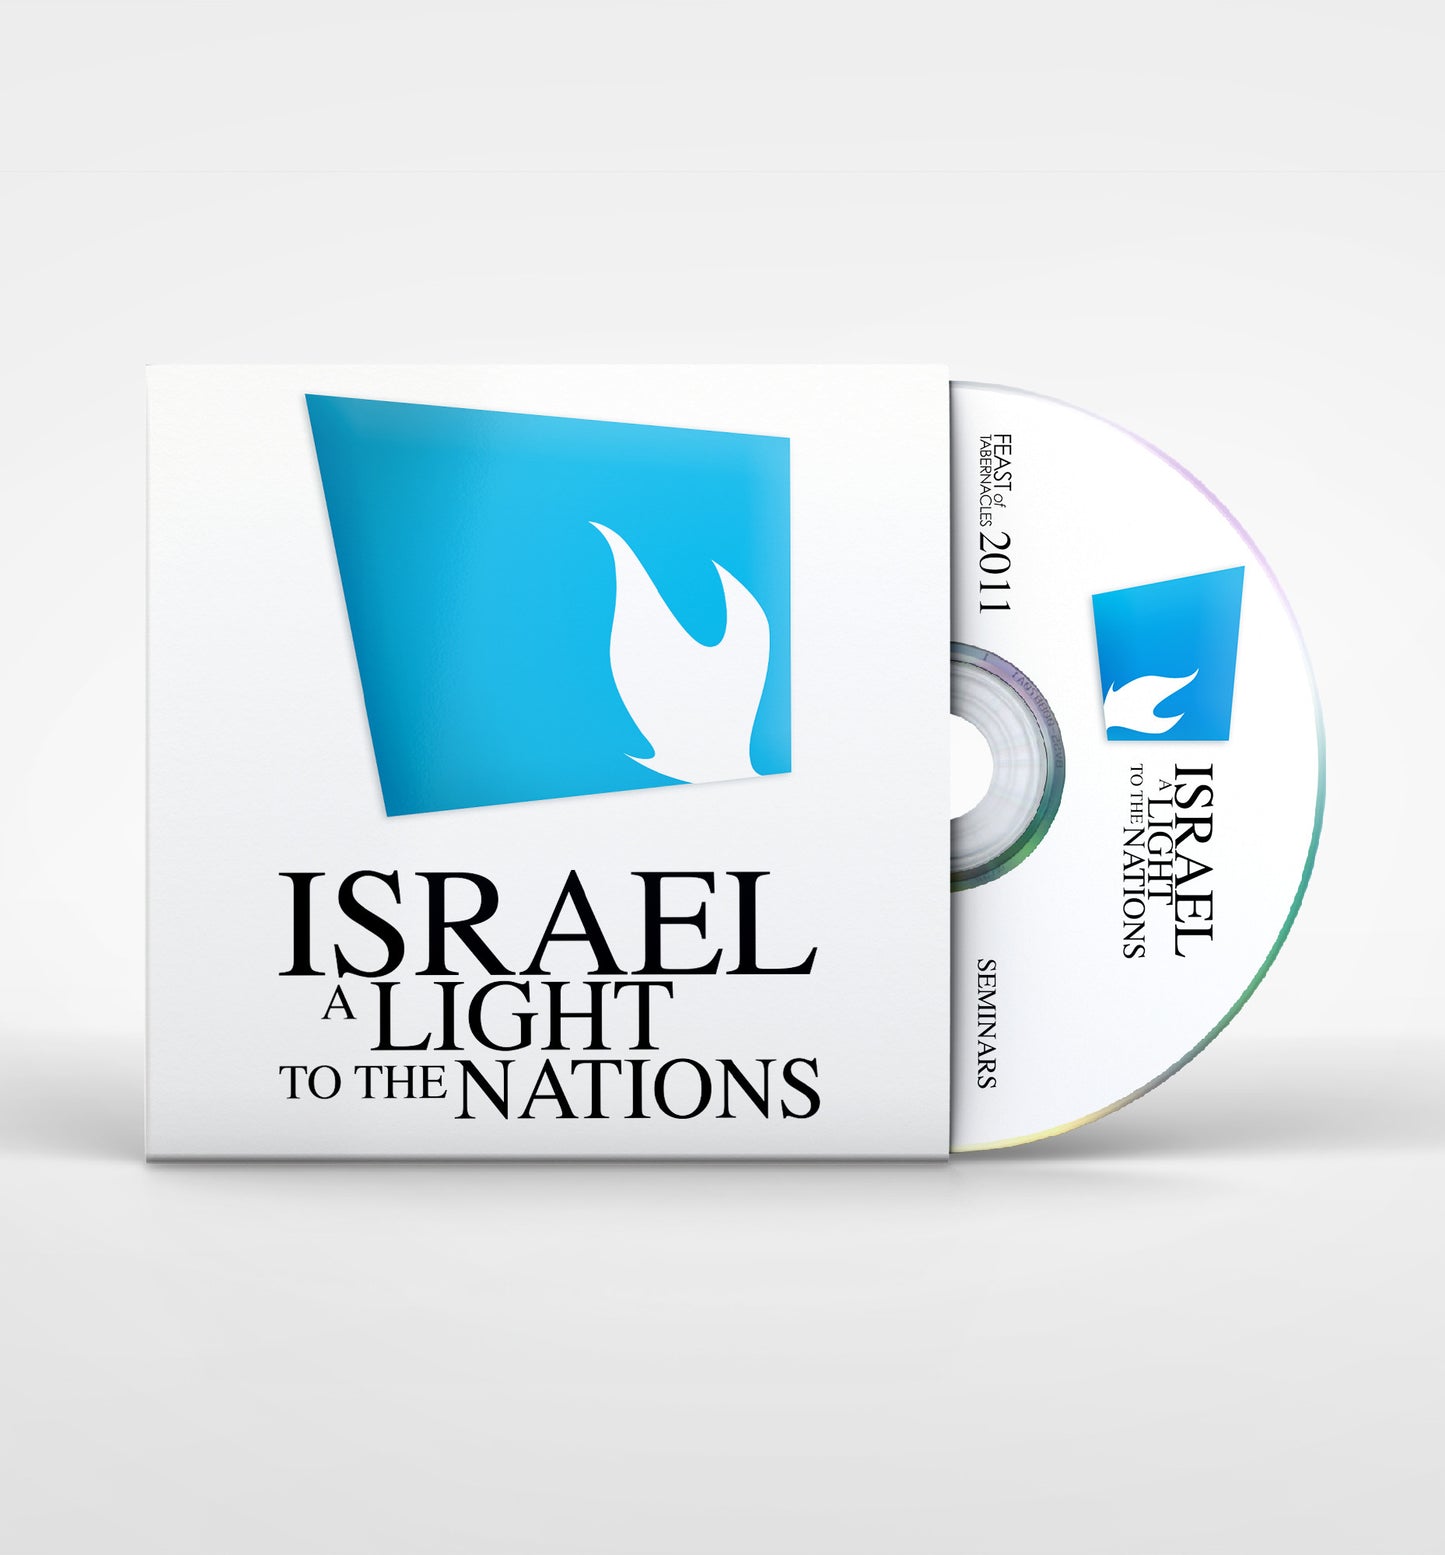 Mosy Madugba 2011 Israel, a Light to the Nations - The Children of Light Seminar DVD